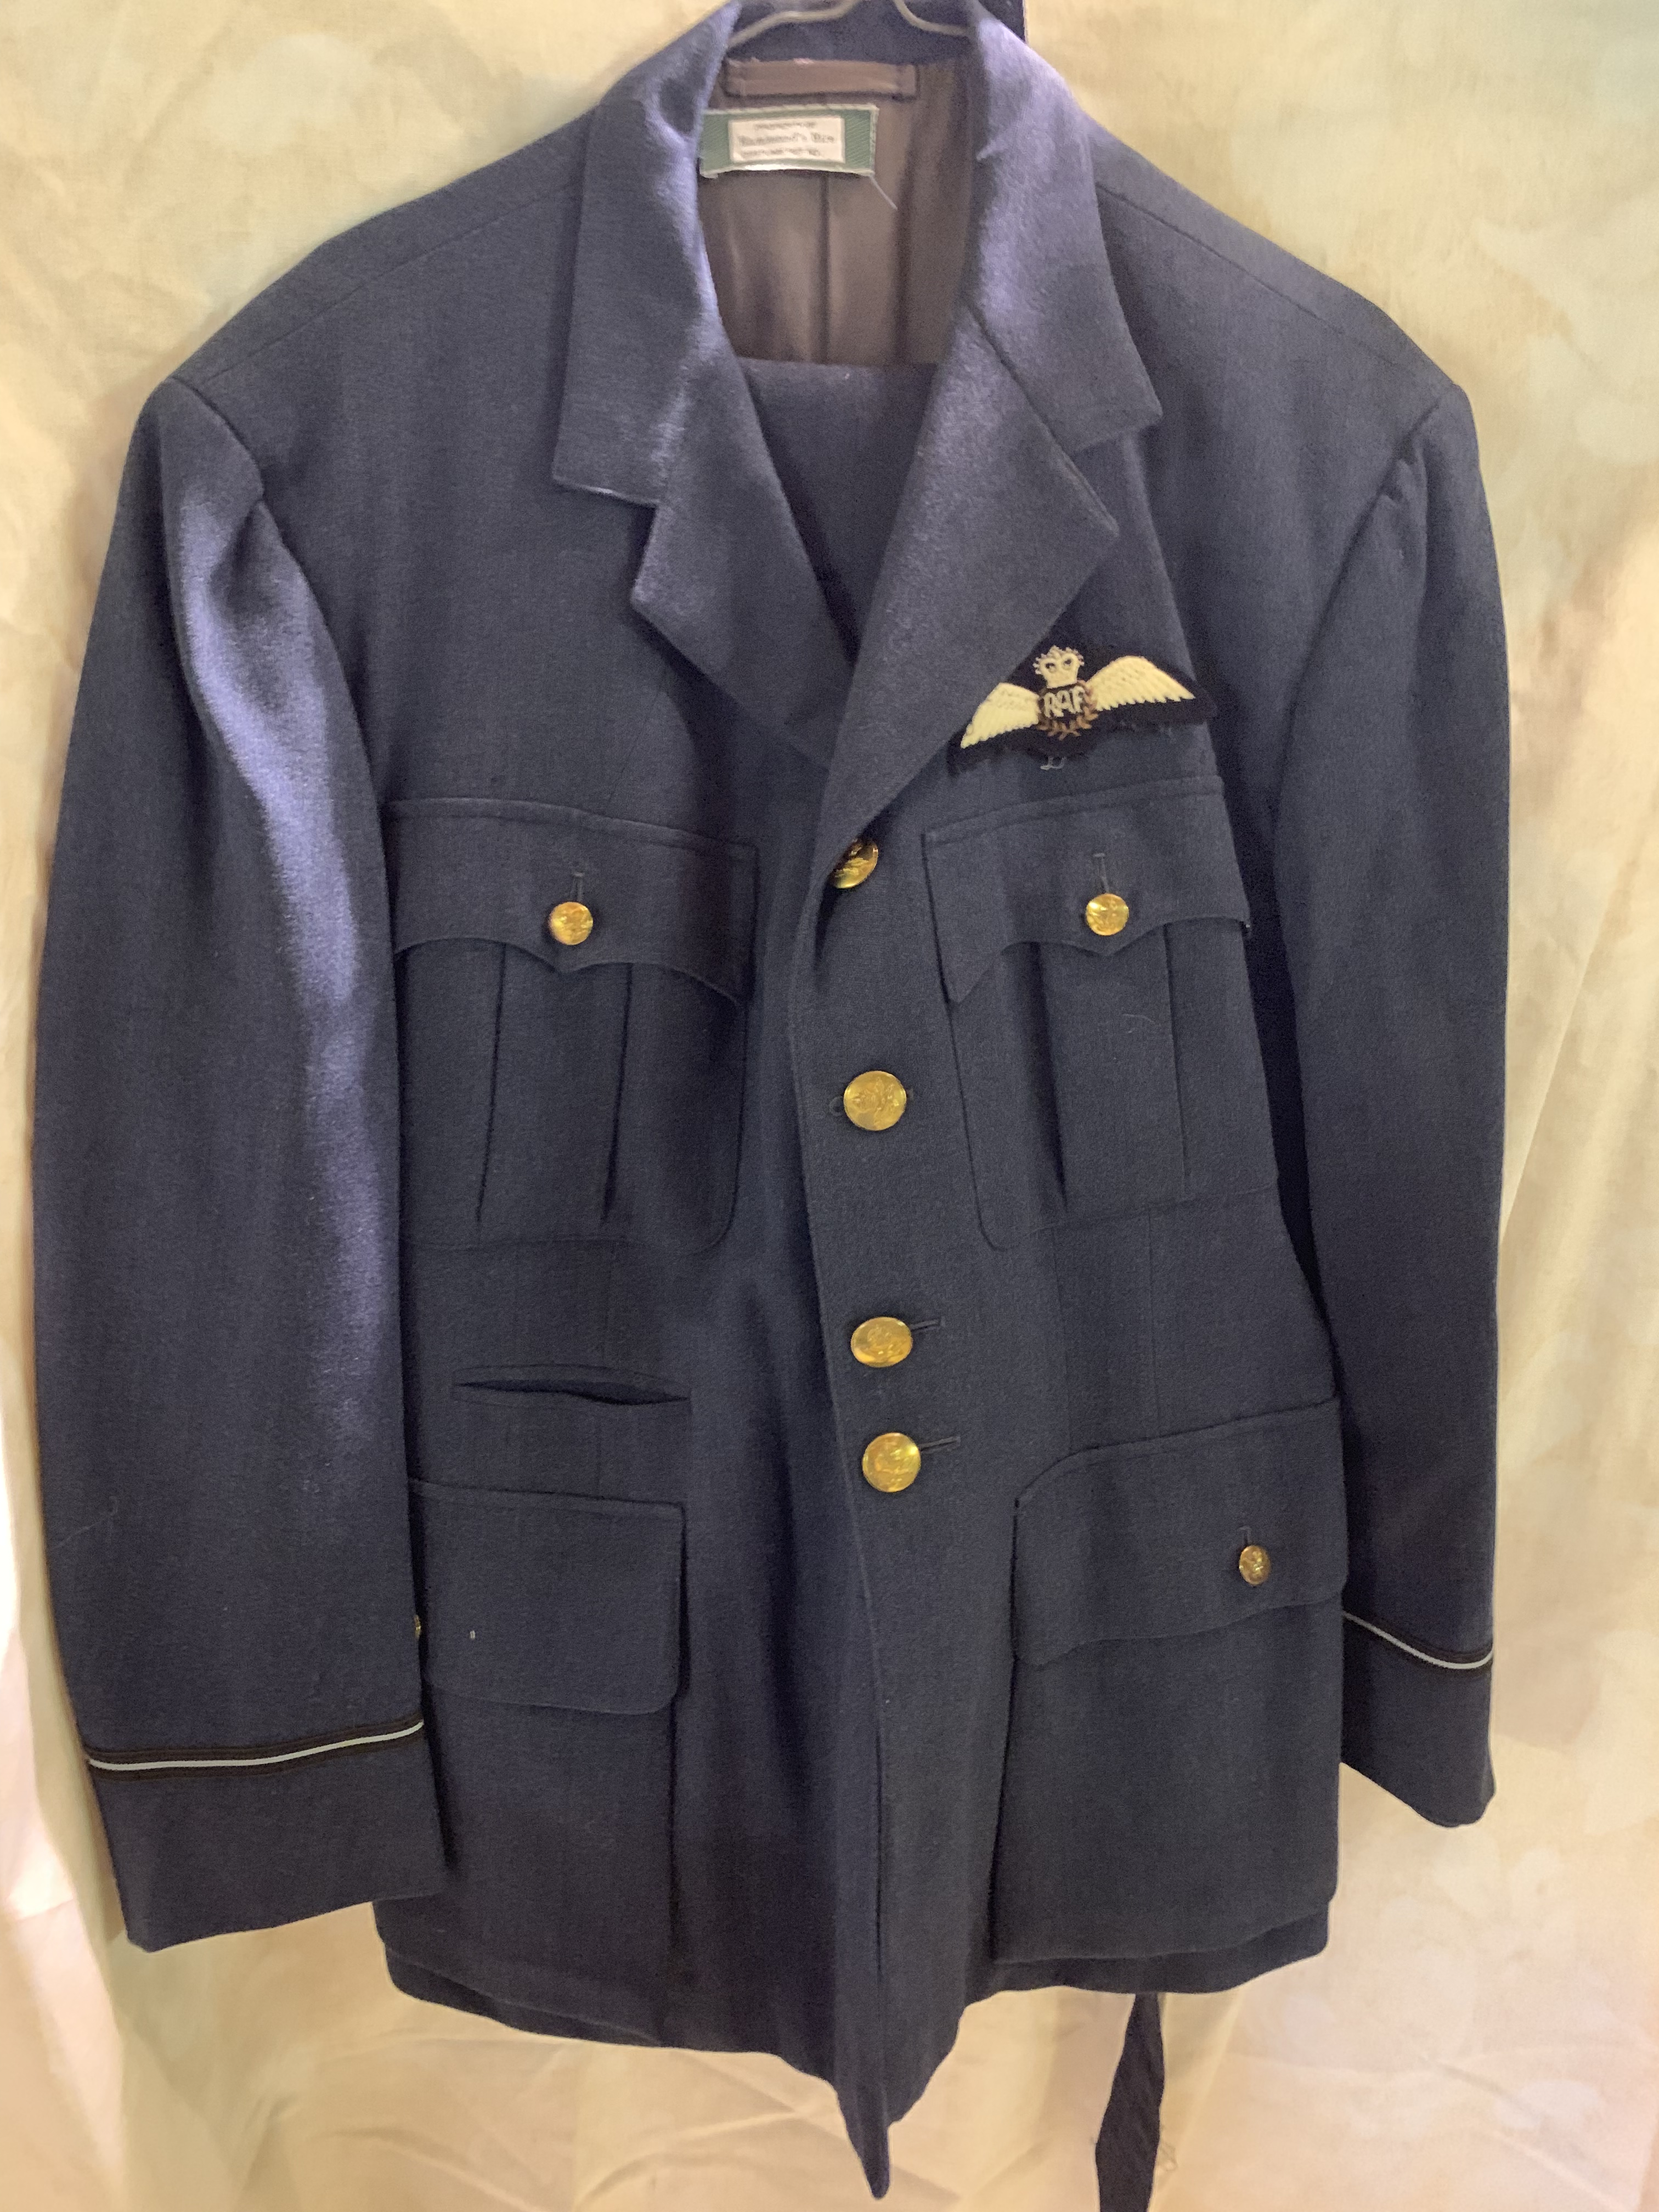 WW2 ERA RAF OFFICERS UNIFORM OF JACKET WITH BELT AND TROUSERS,